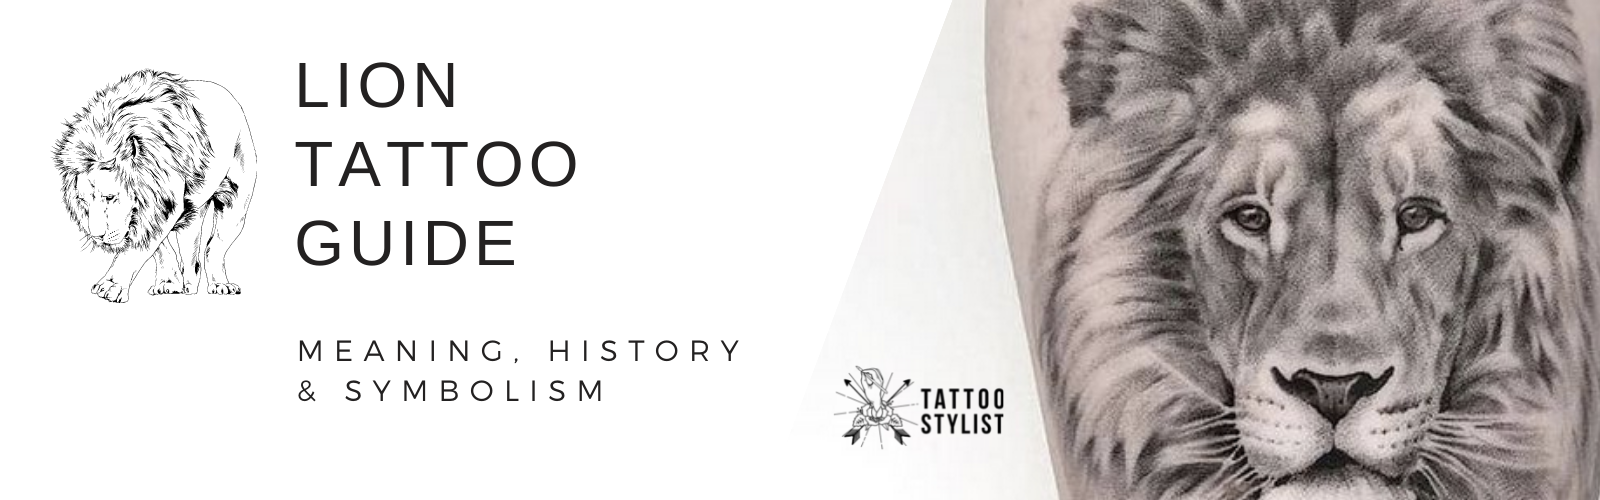 200+ Powerful Lion Tattoo Ideas With Meanings and History - Tattoo Stylist